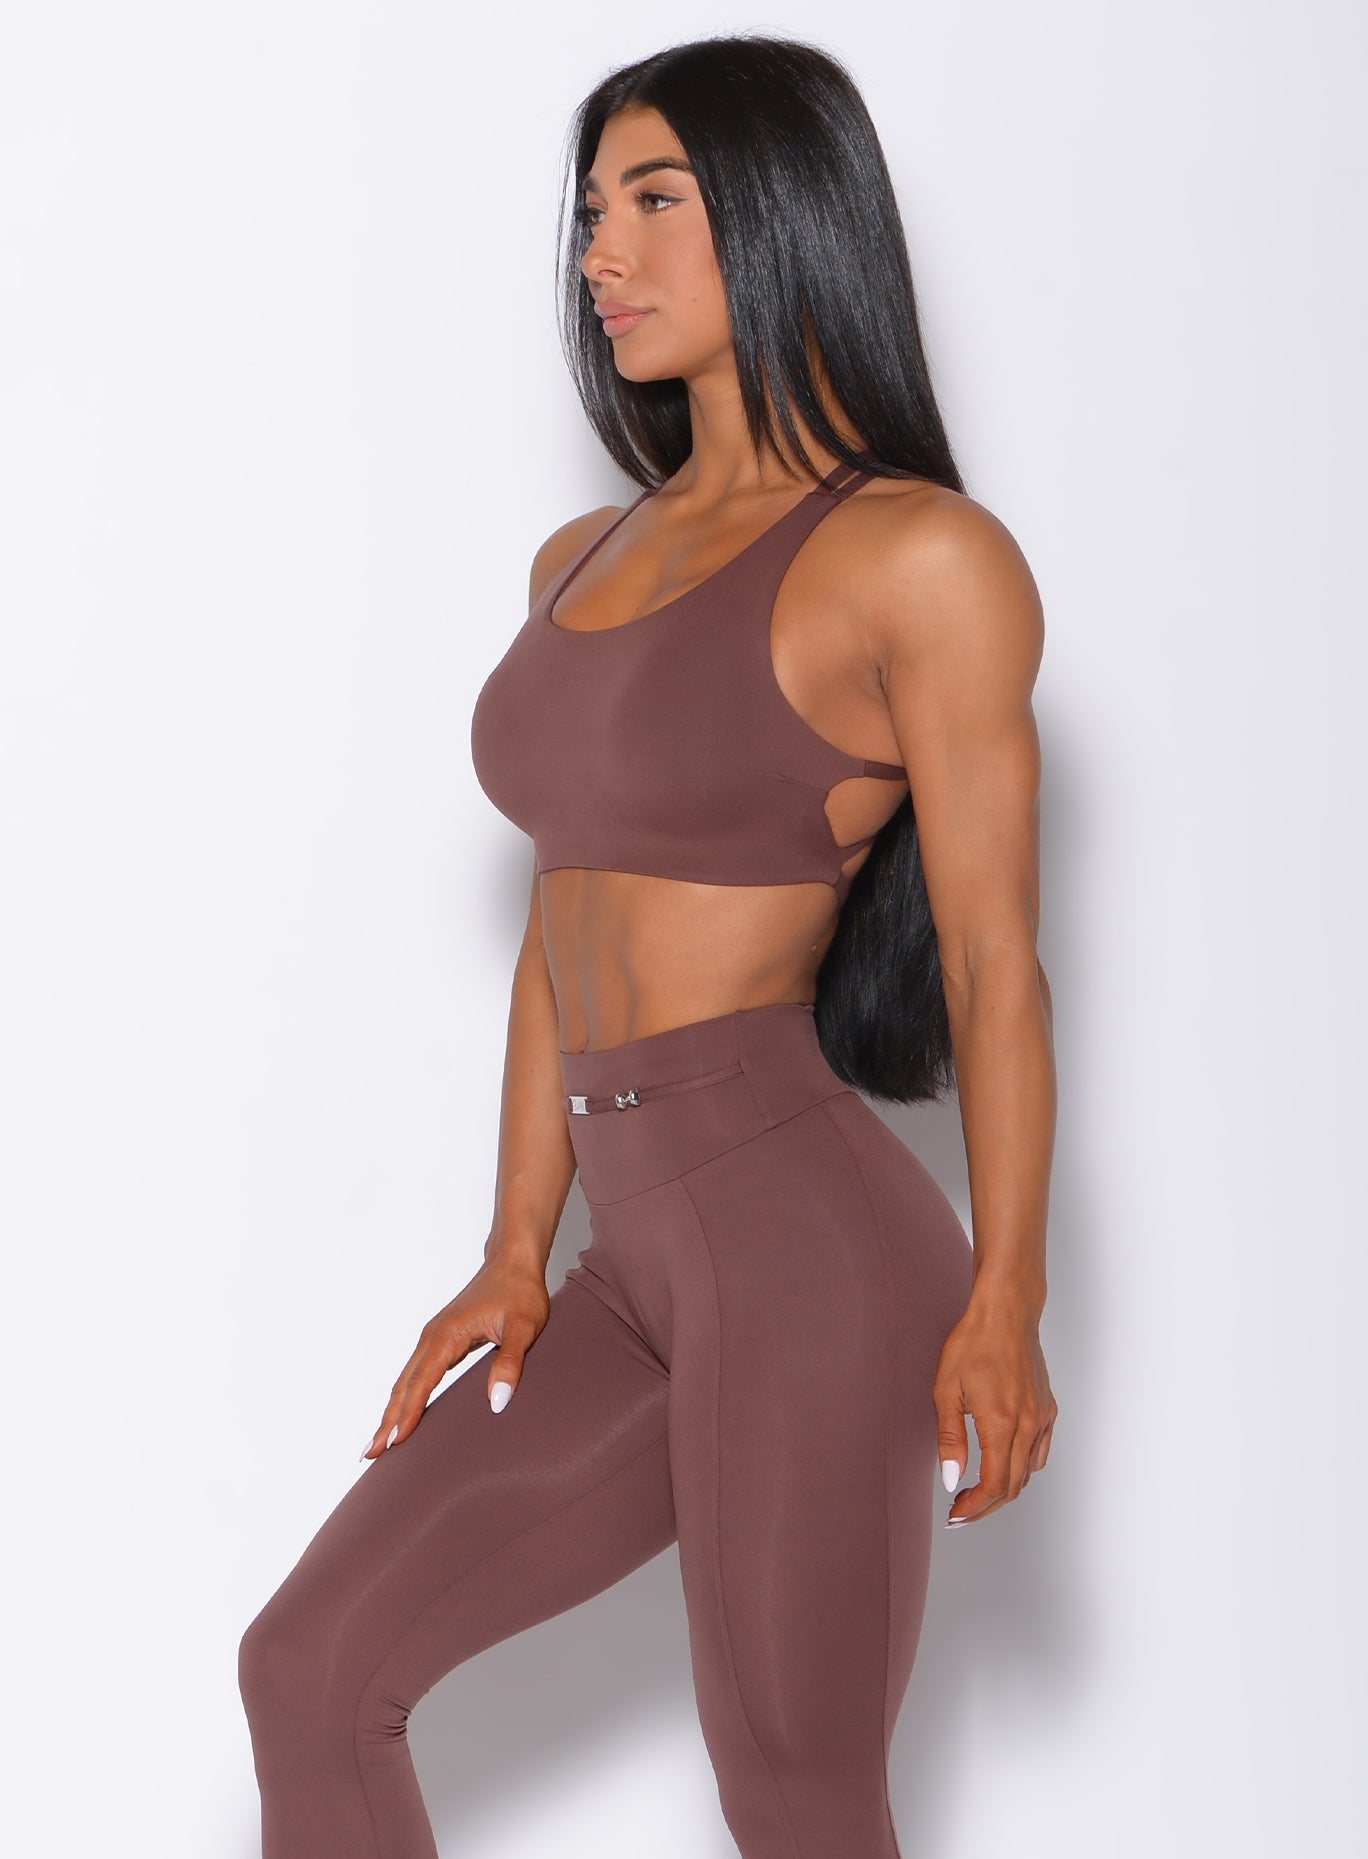 Left side profile view of a model angled left wearing our barbell sports bra in chocolate color and a matching leggings